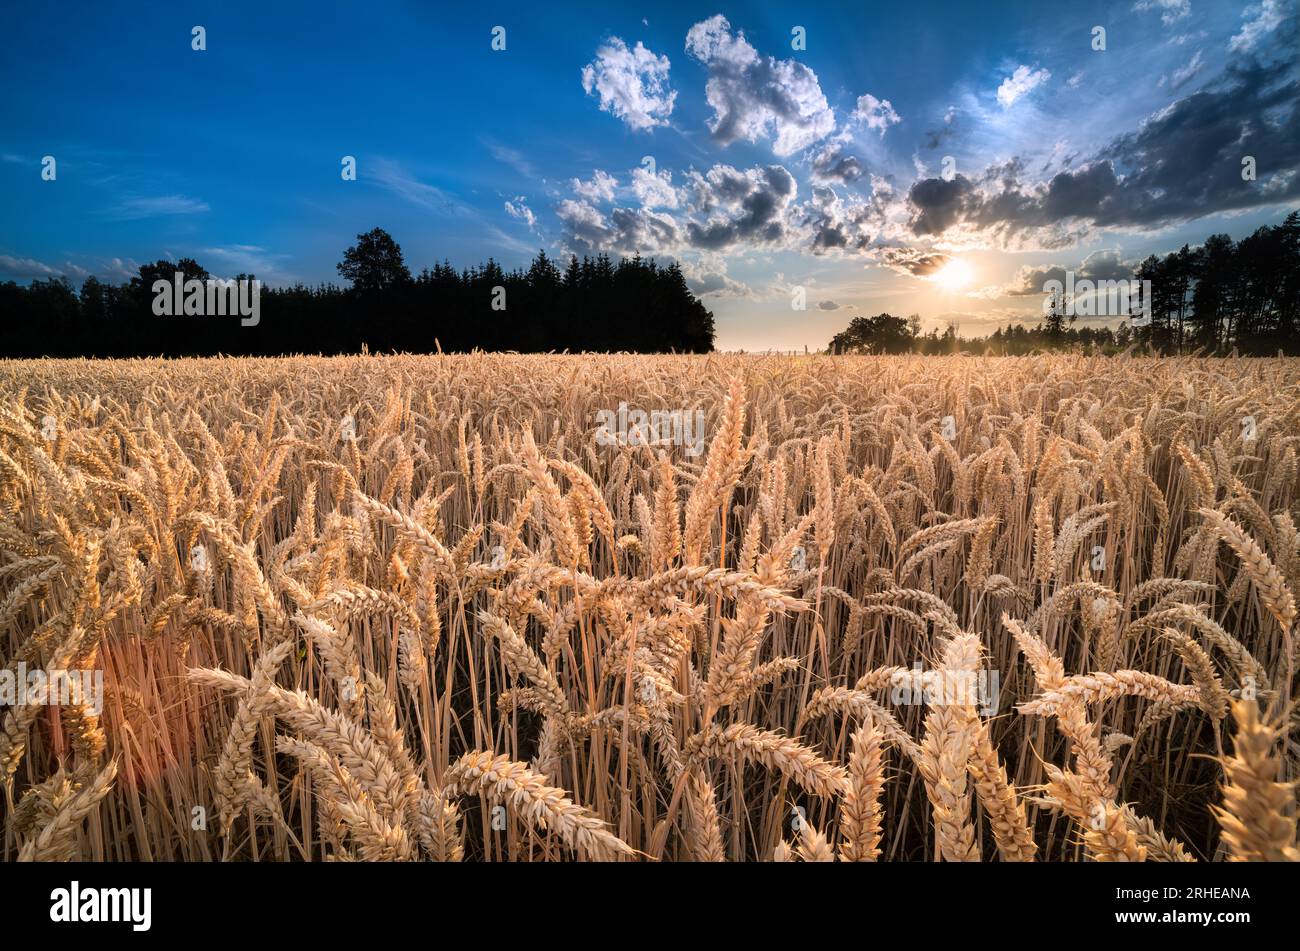 Close-up of ripe common wheat ears at sunset in rural landscape. Triticum aestivum. Beautiful sunlit summer cornfield, forest or sun beams on blue sky. Stock Photo